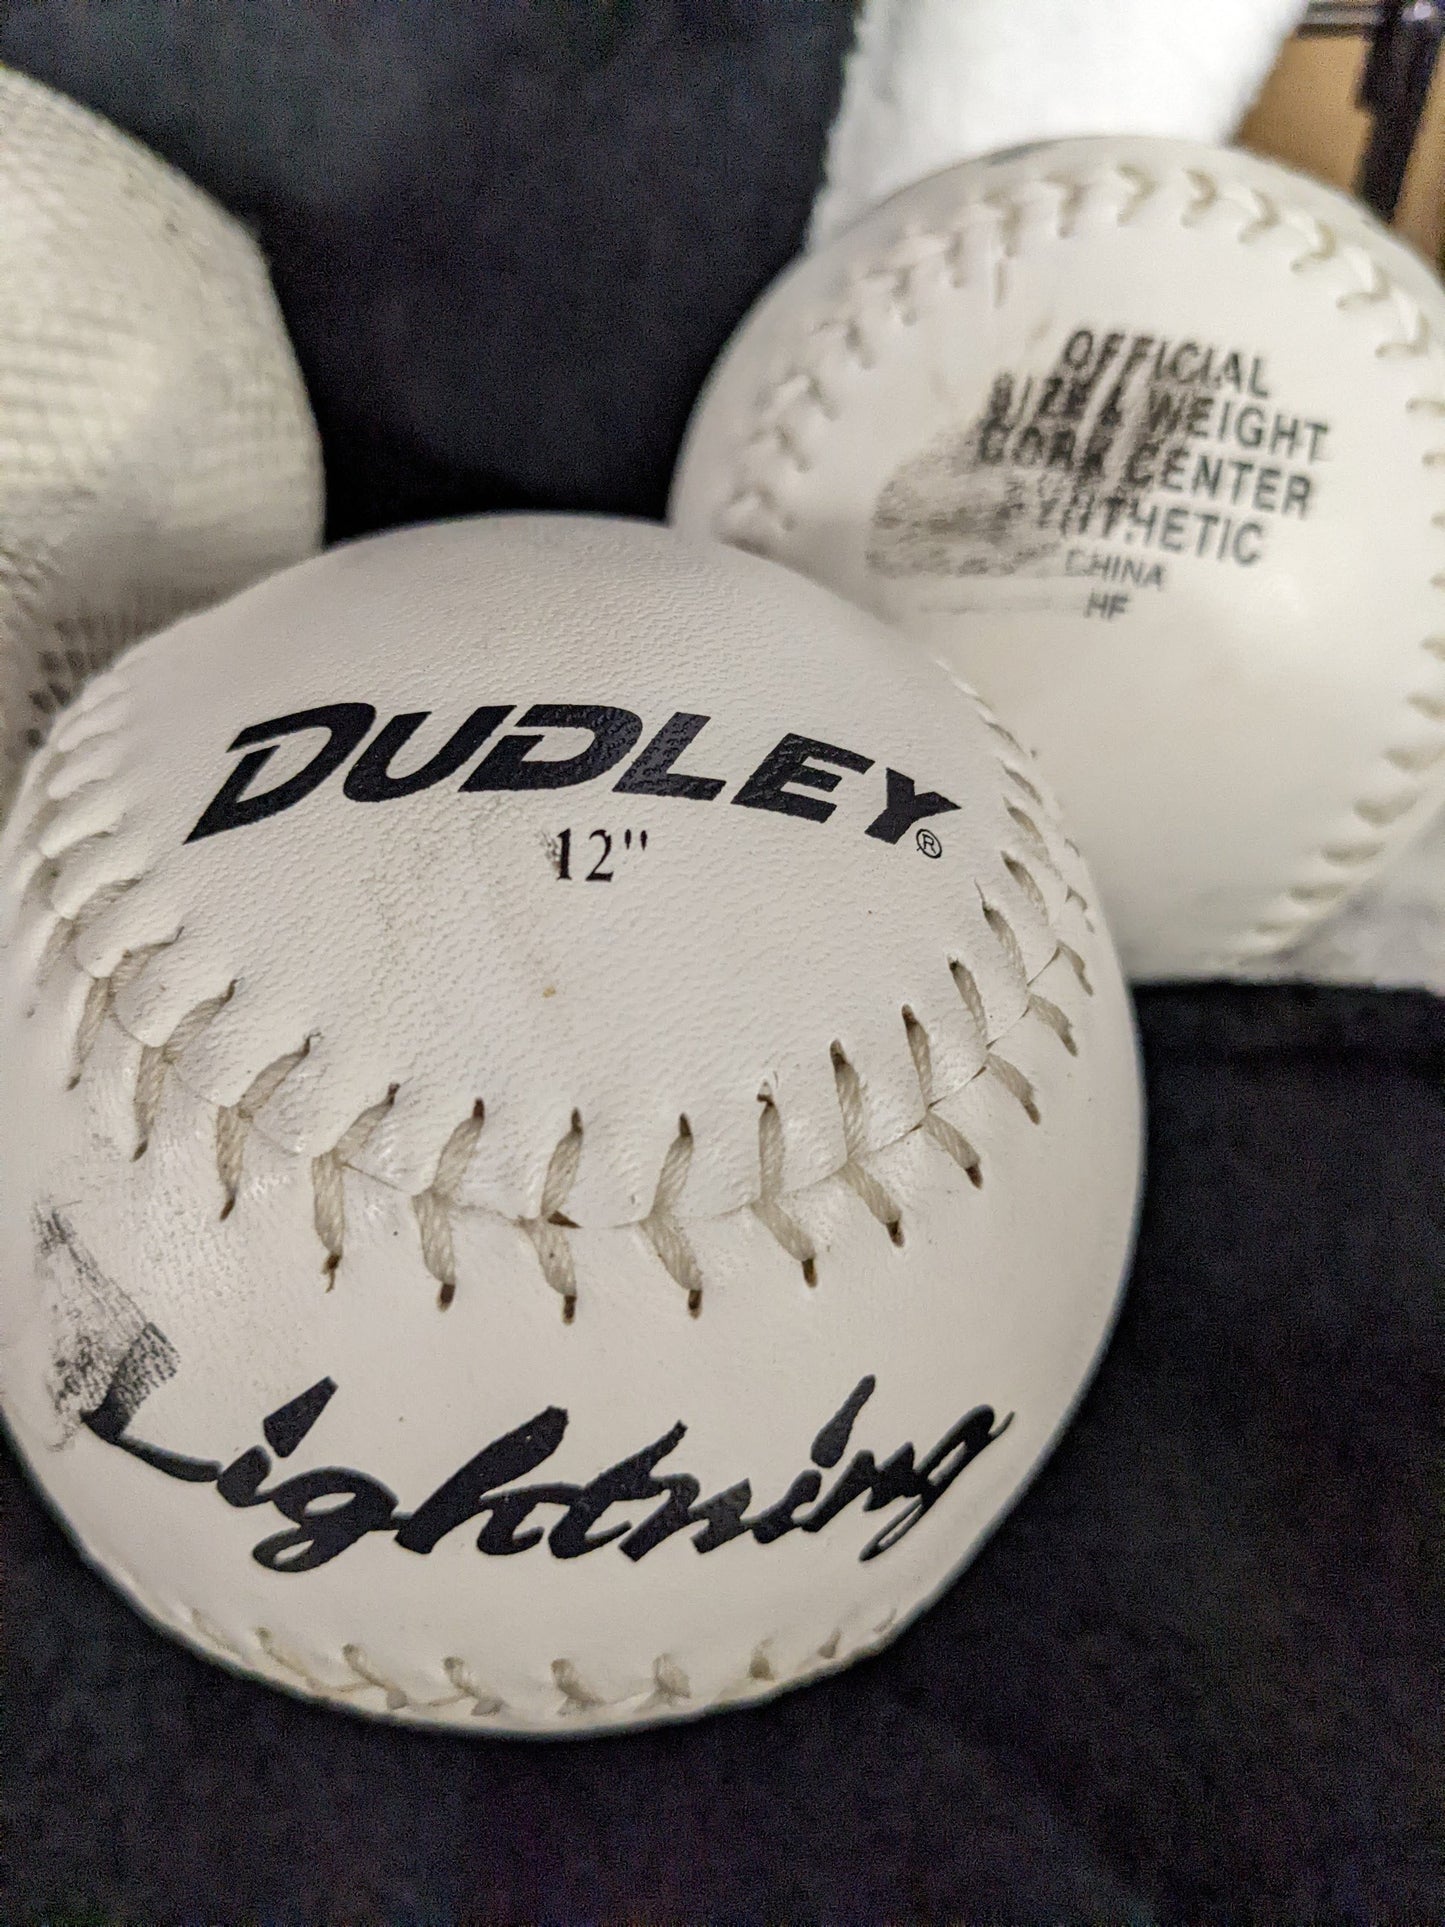 Dudley Lightning Official 12 In Softballs Size Bag of 5 Color White Condition Used